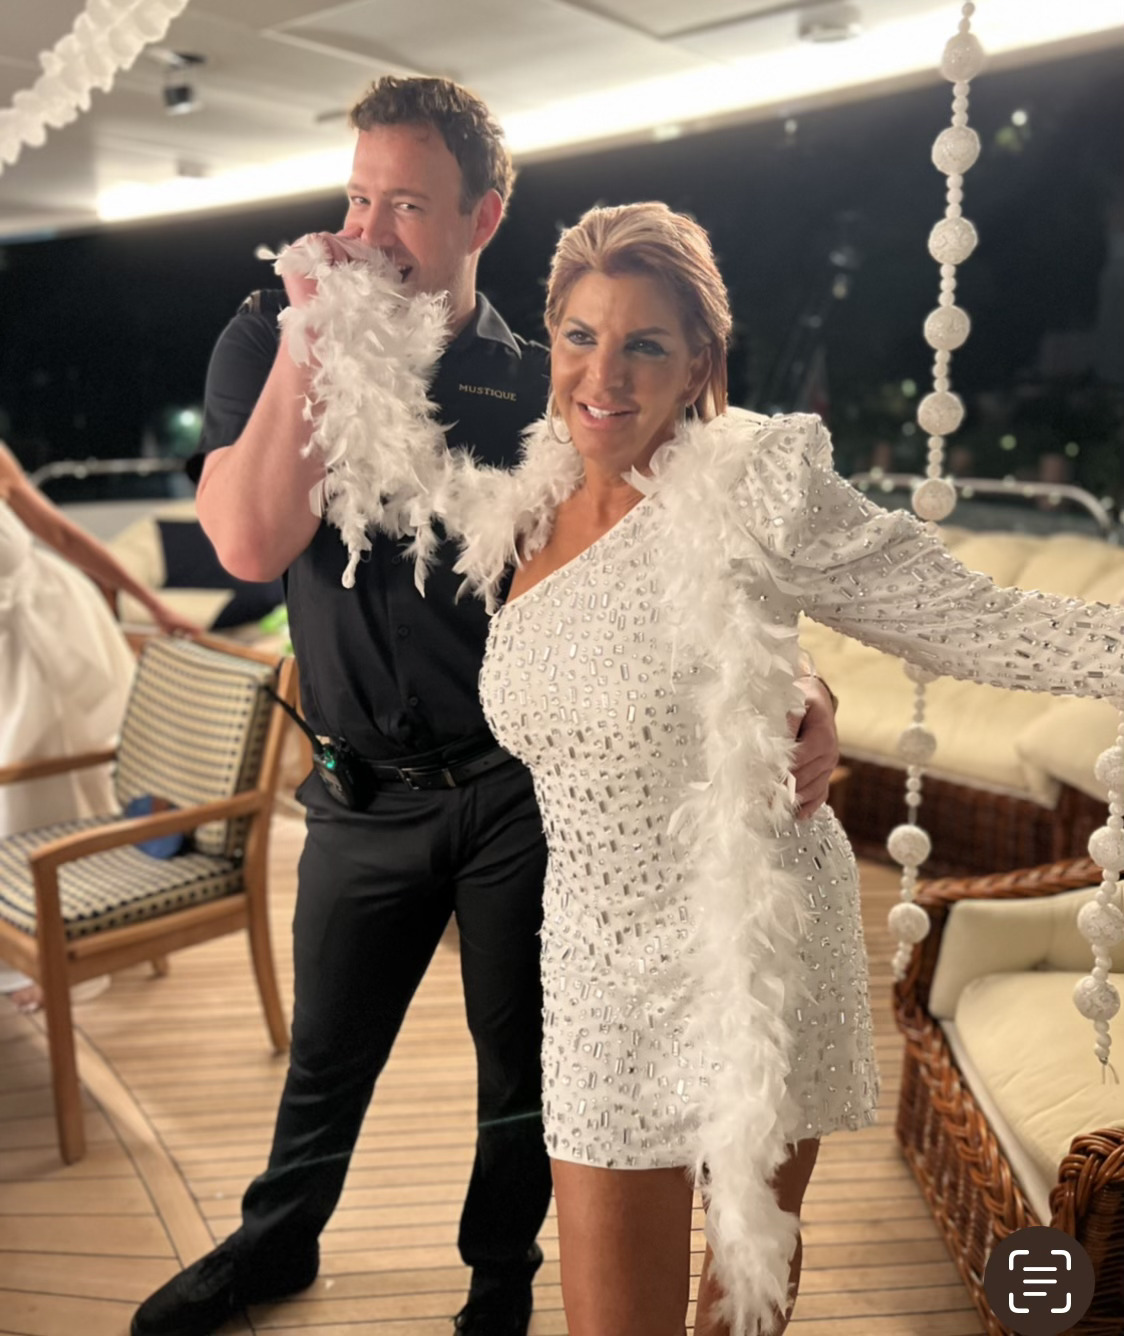 P.O.W.E.R. Magazine (Professional Organization of Women of Excellence Recognized) Member Marcie Manfredonia Featured on Bravo’s “Below Deck Mediterranean” Tonight